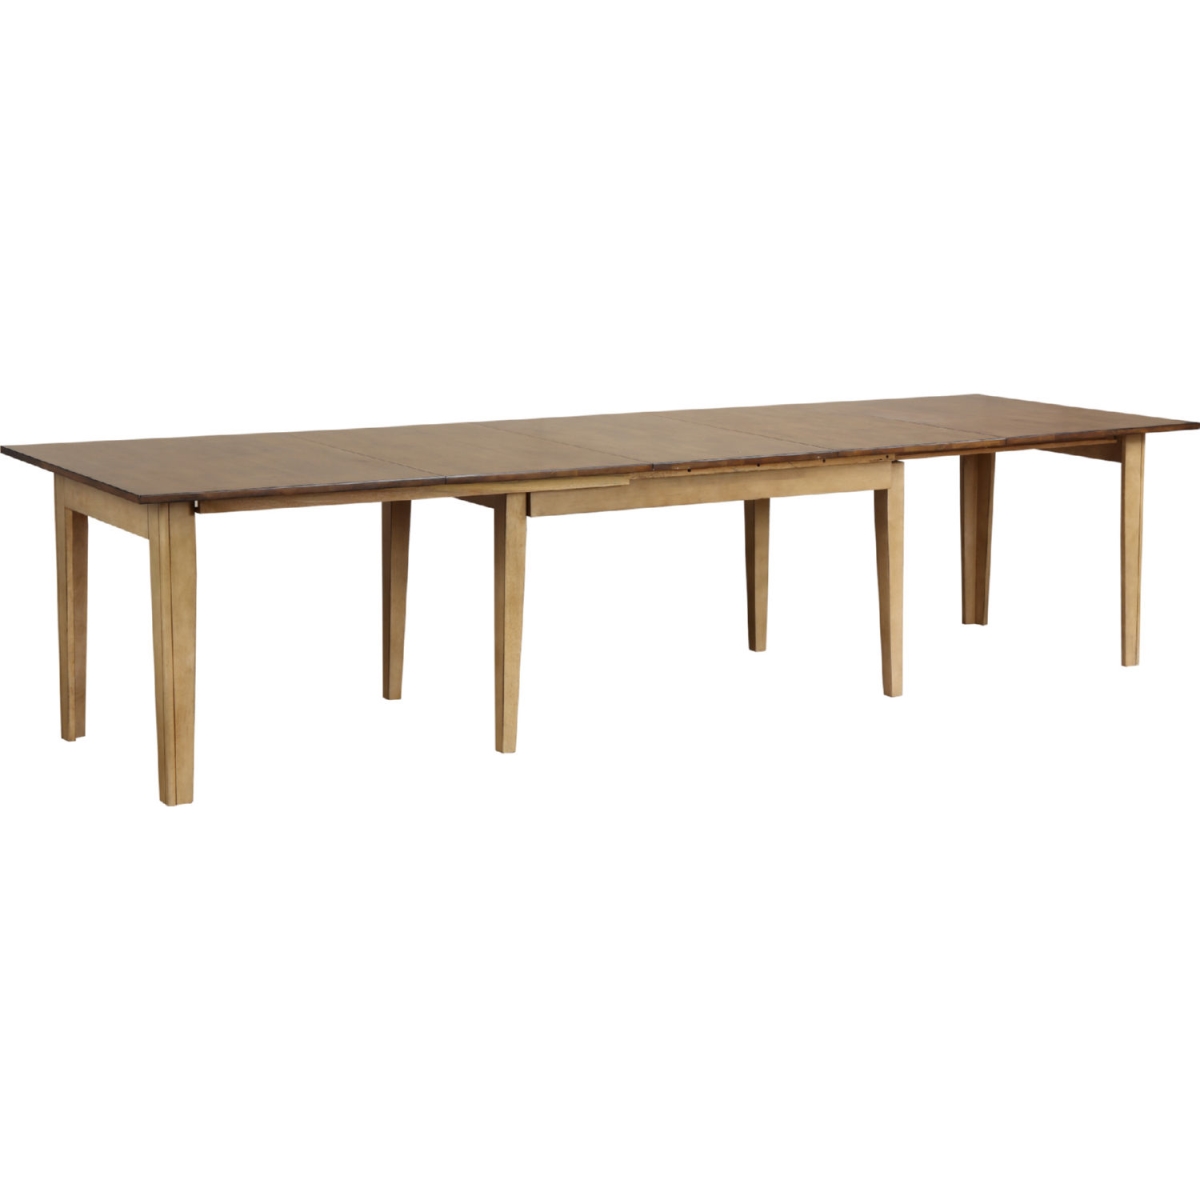 Fine-line 134 in. Brook Rectangular Extendable Dining Table with Seats 12